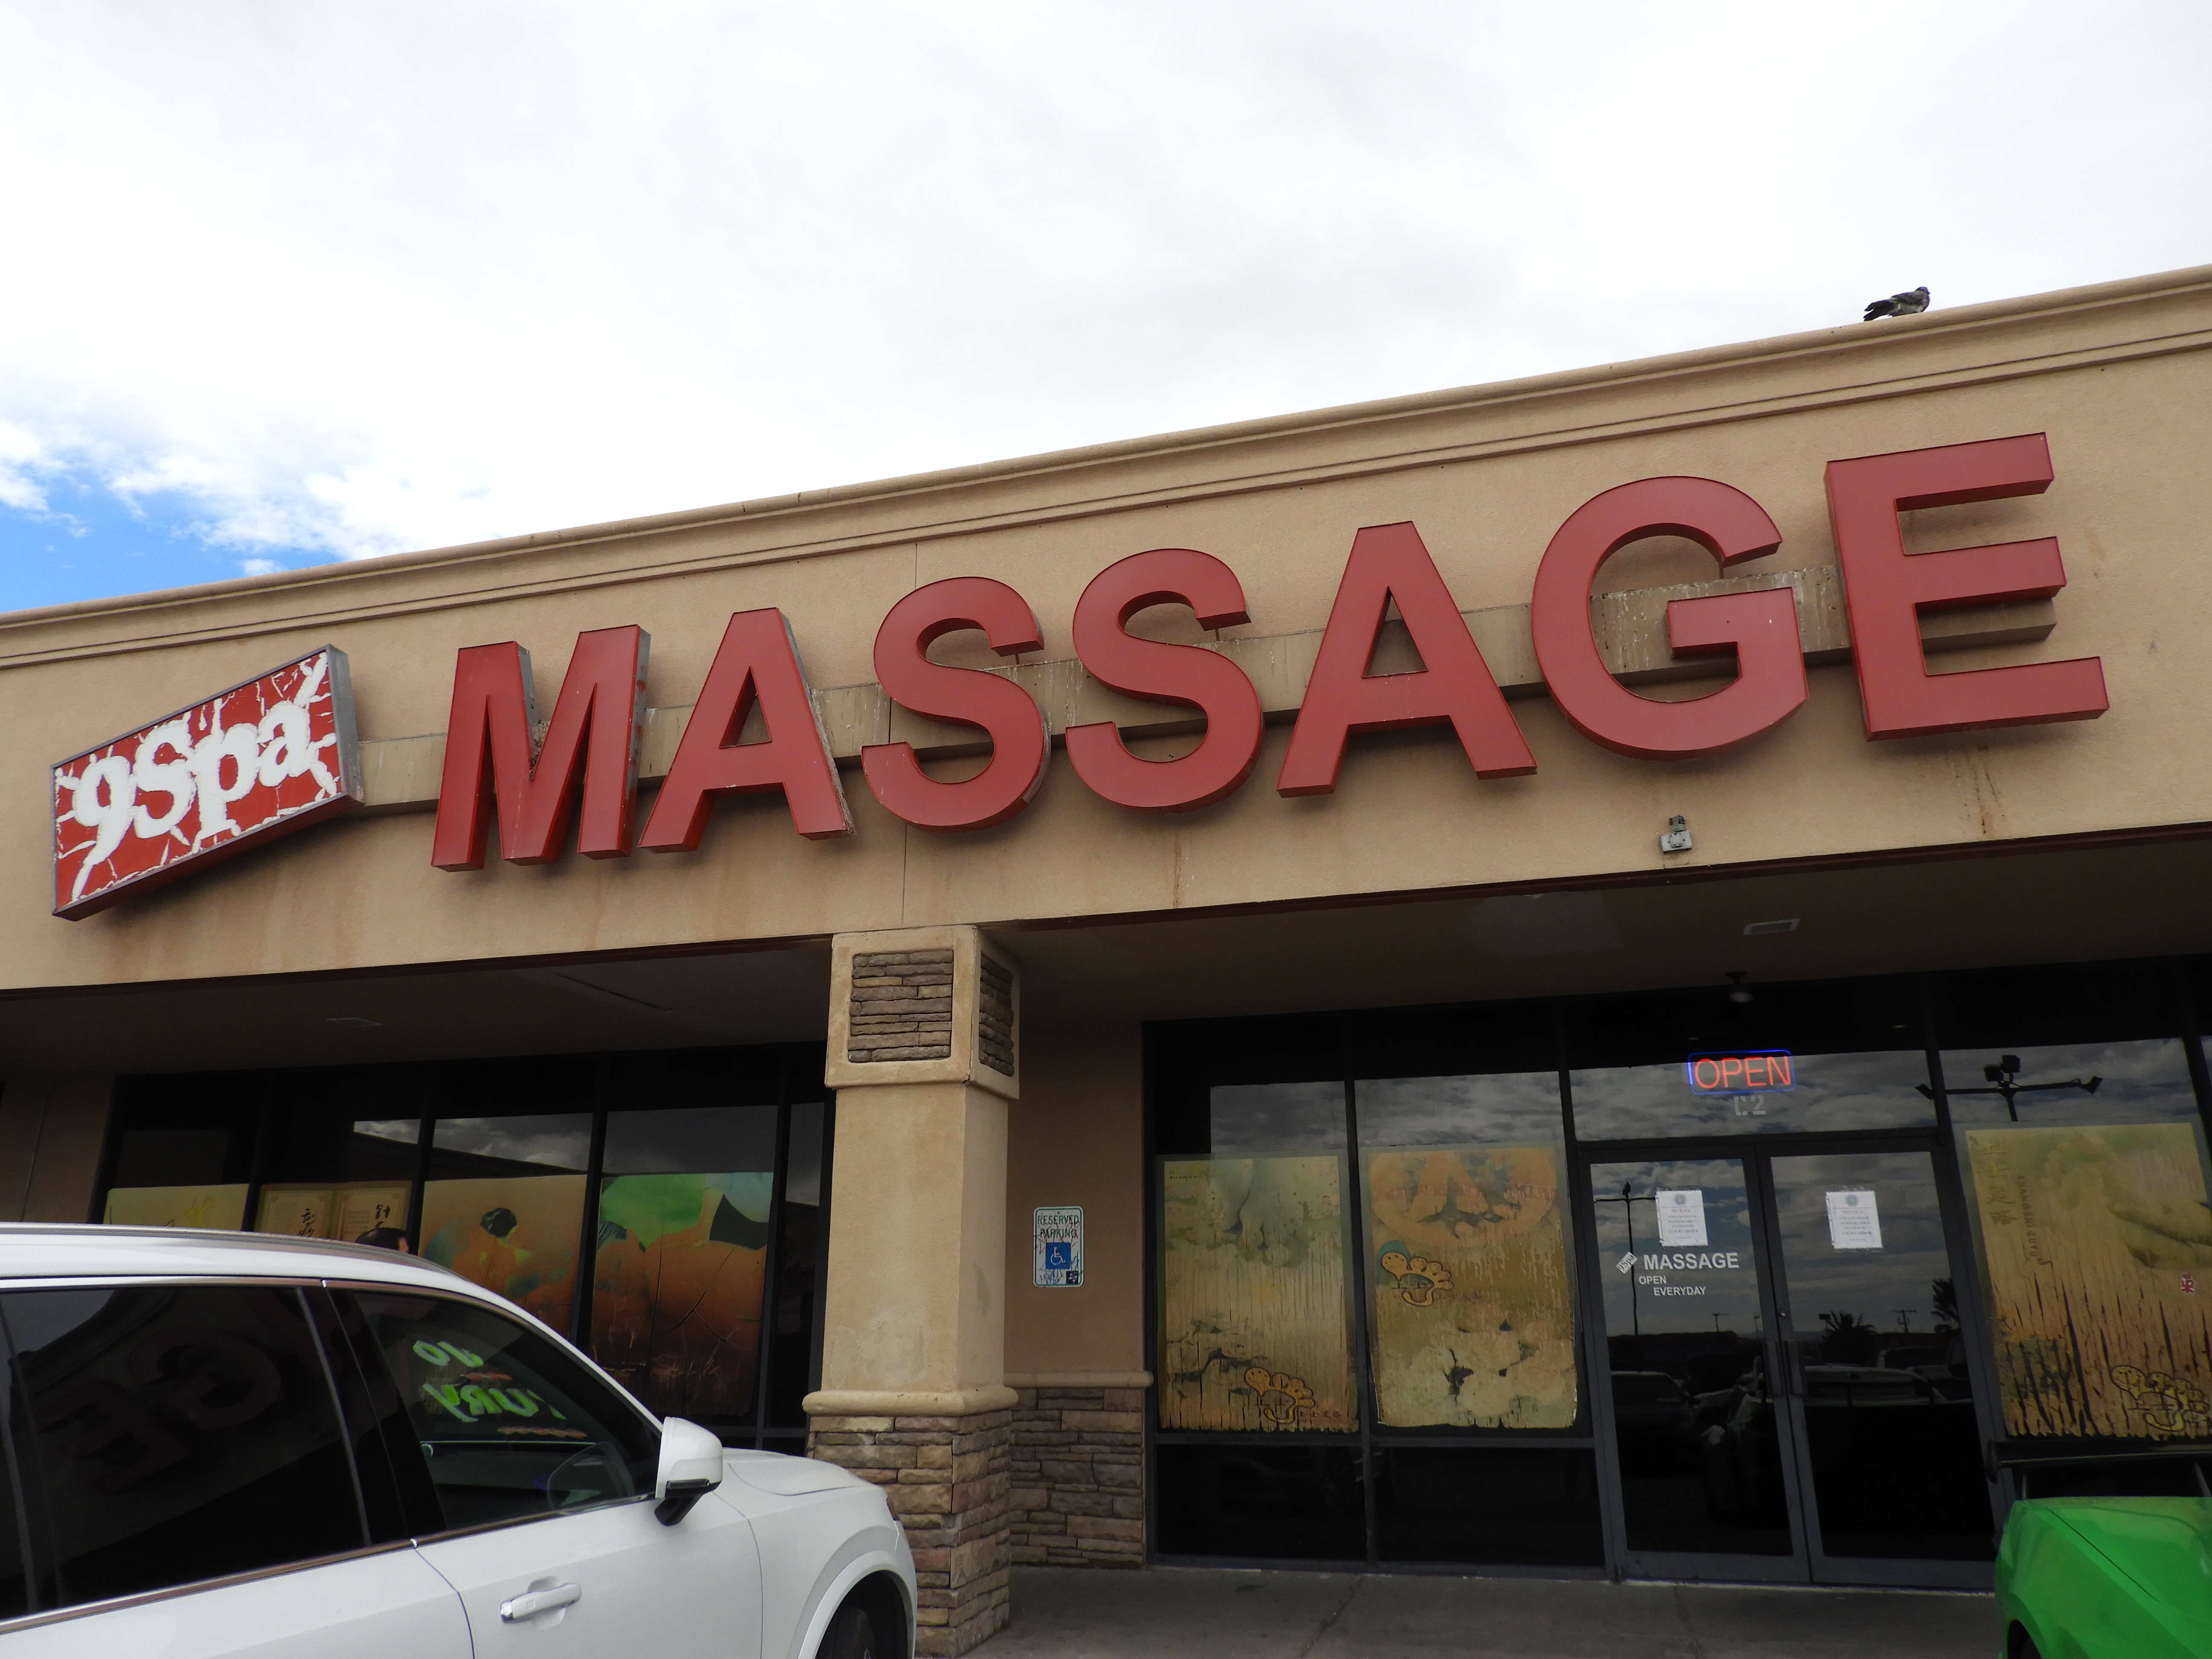 cindy nevens recommends massage parlor review chicago pic